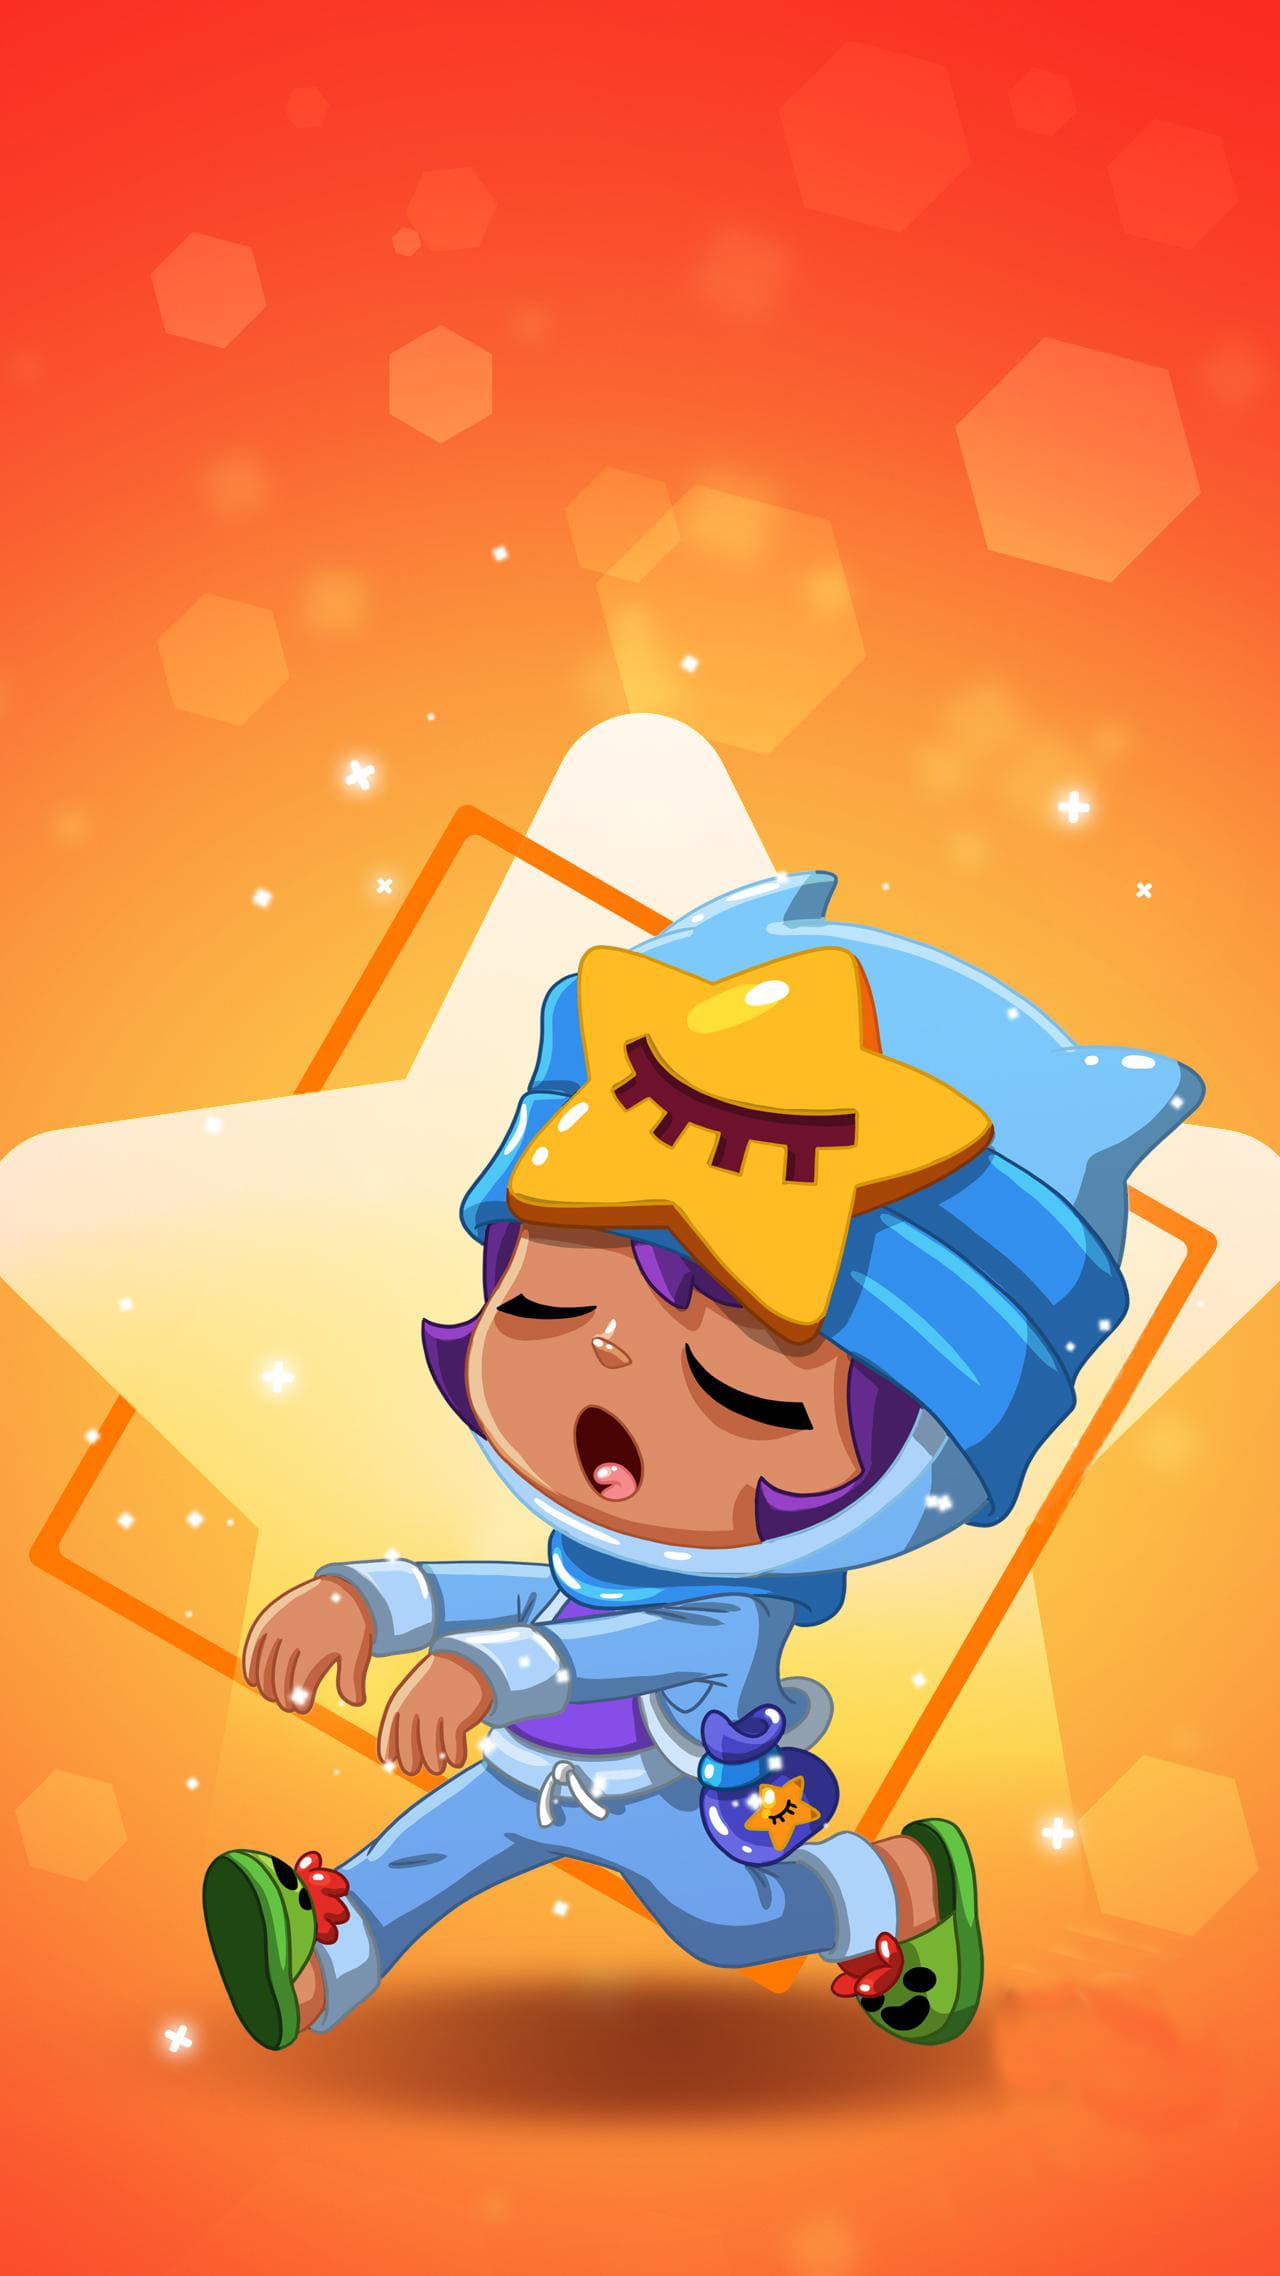 Brawl Stars Phone Wallpapers. Download Cool Images For Free